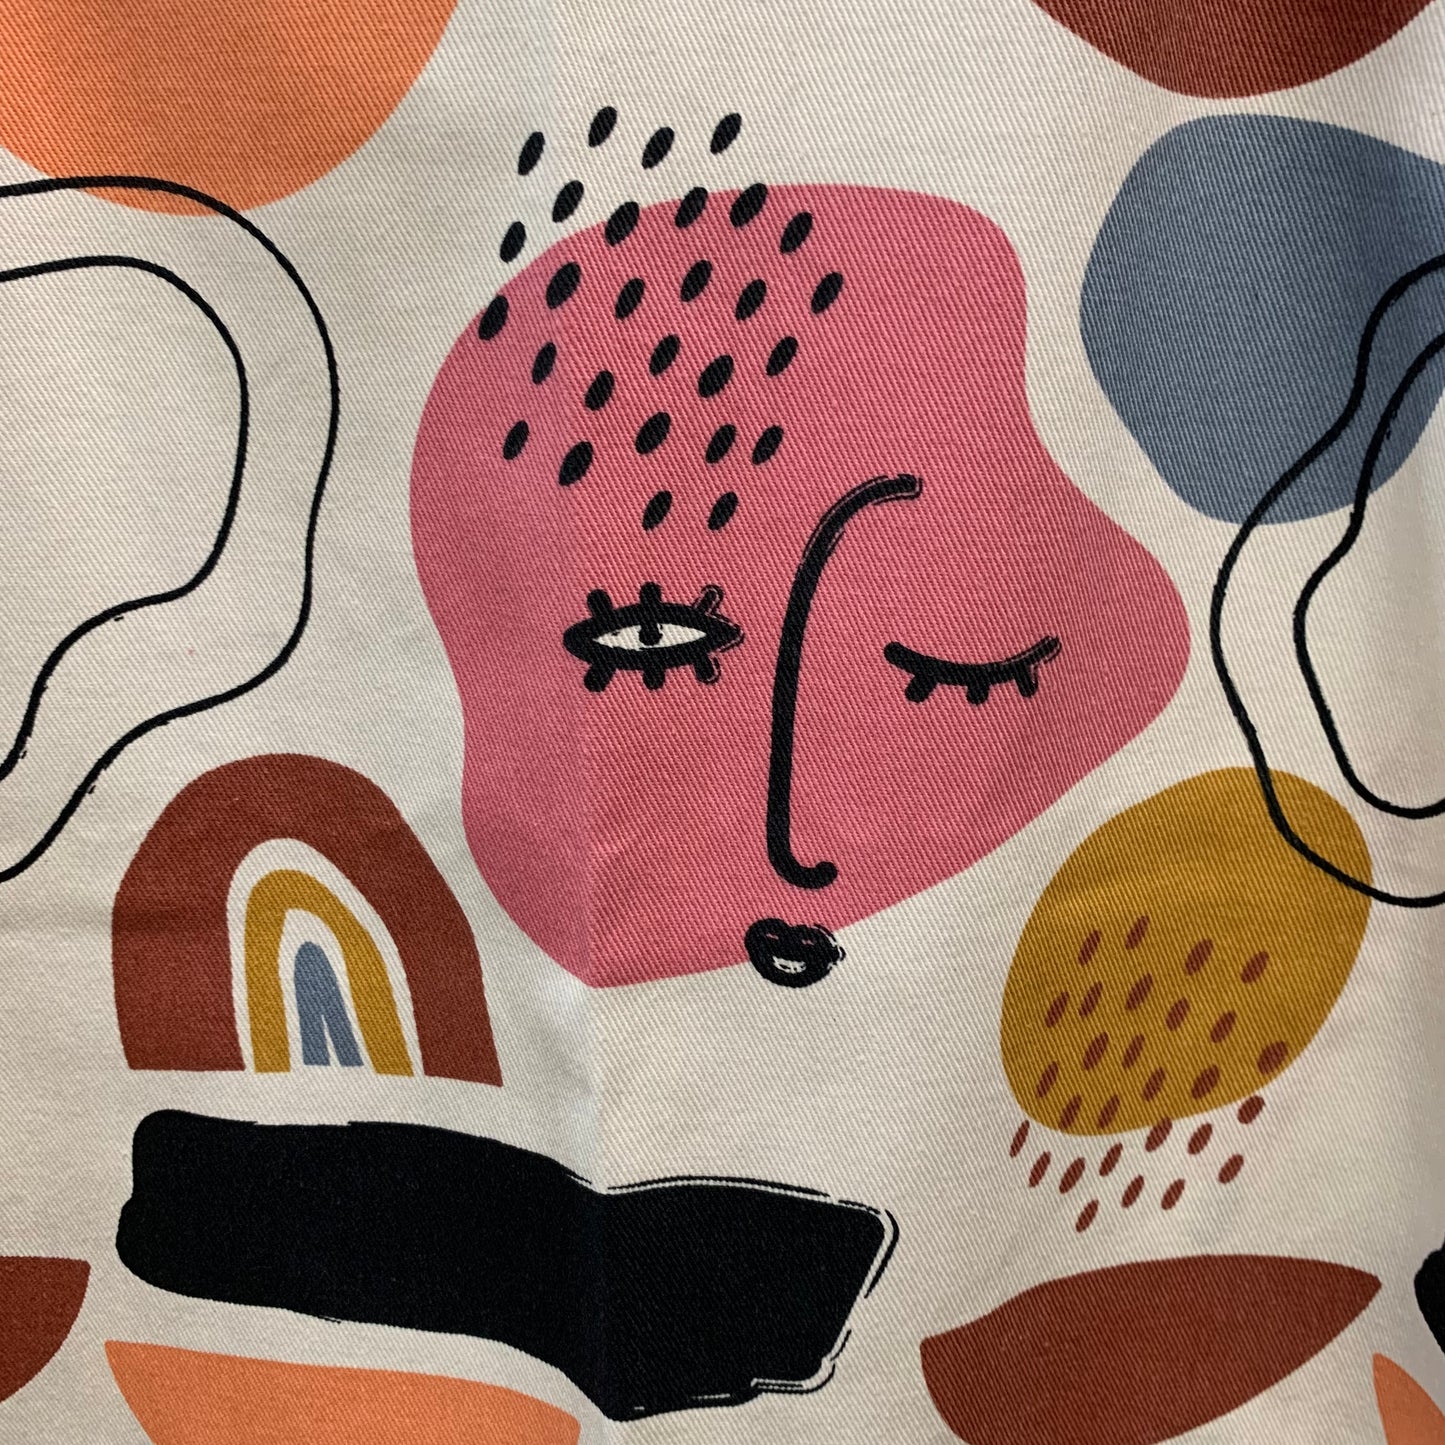 MAKIN' WHOOPEE - "Funky Faces" APRON